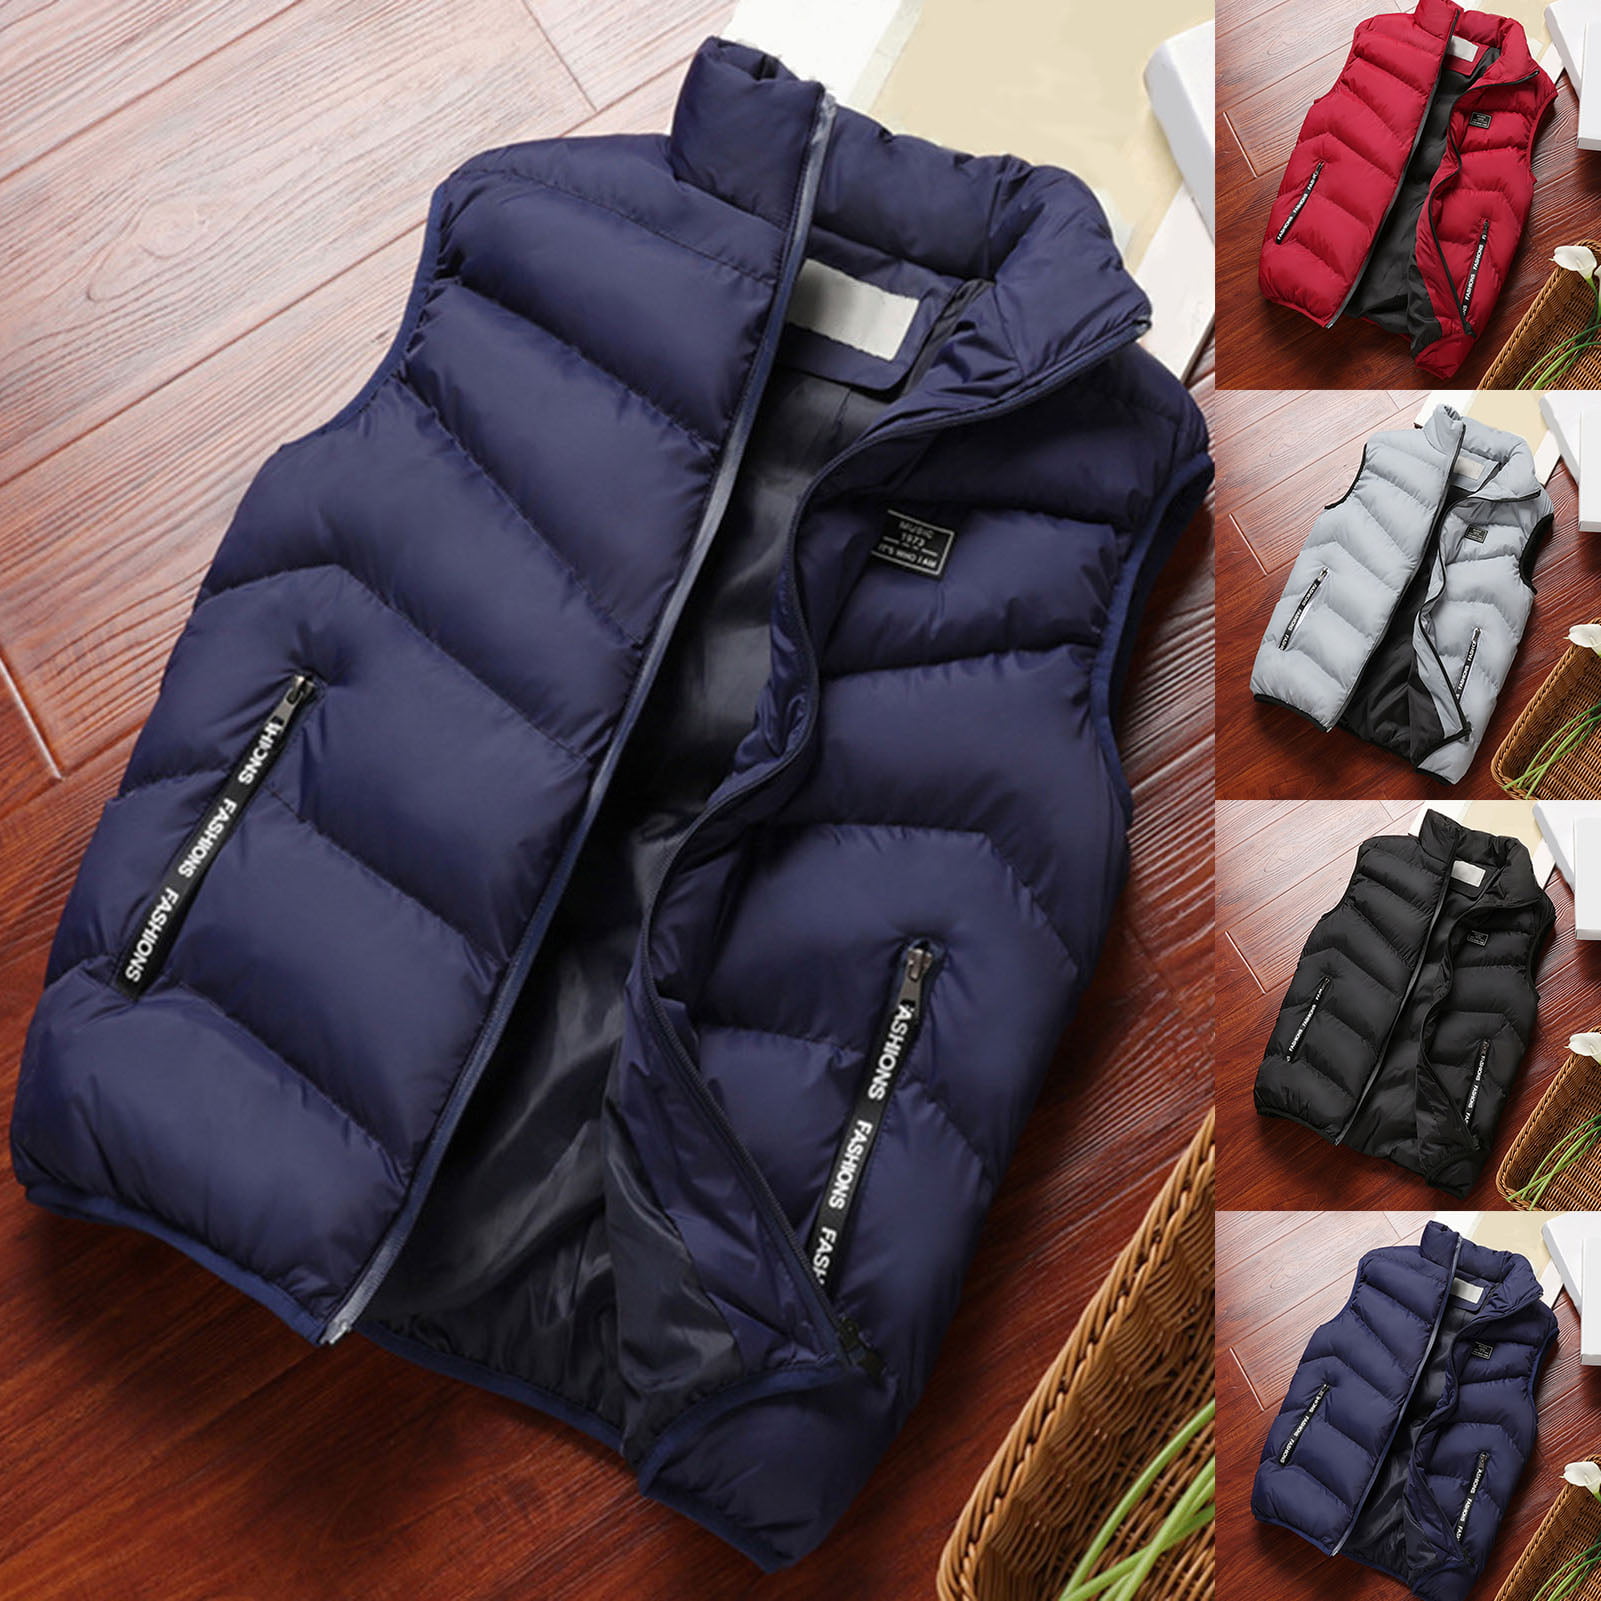 How To Wear A Winter Vest Mens | lupon.gov.ph